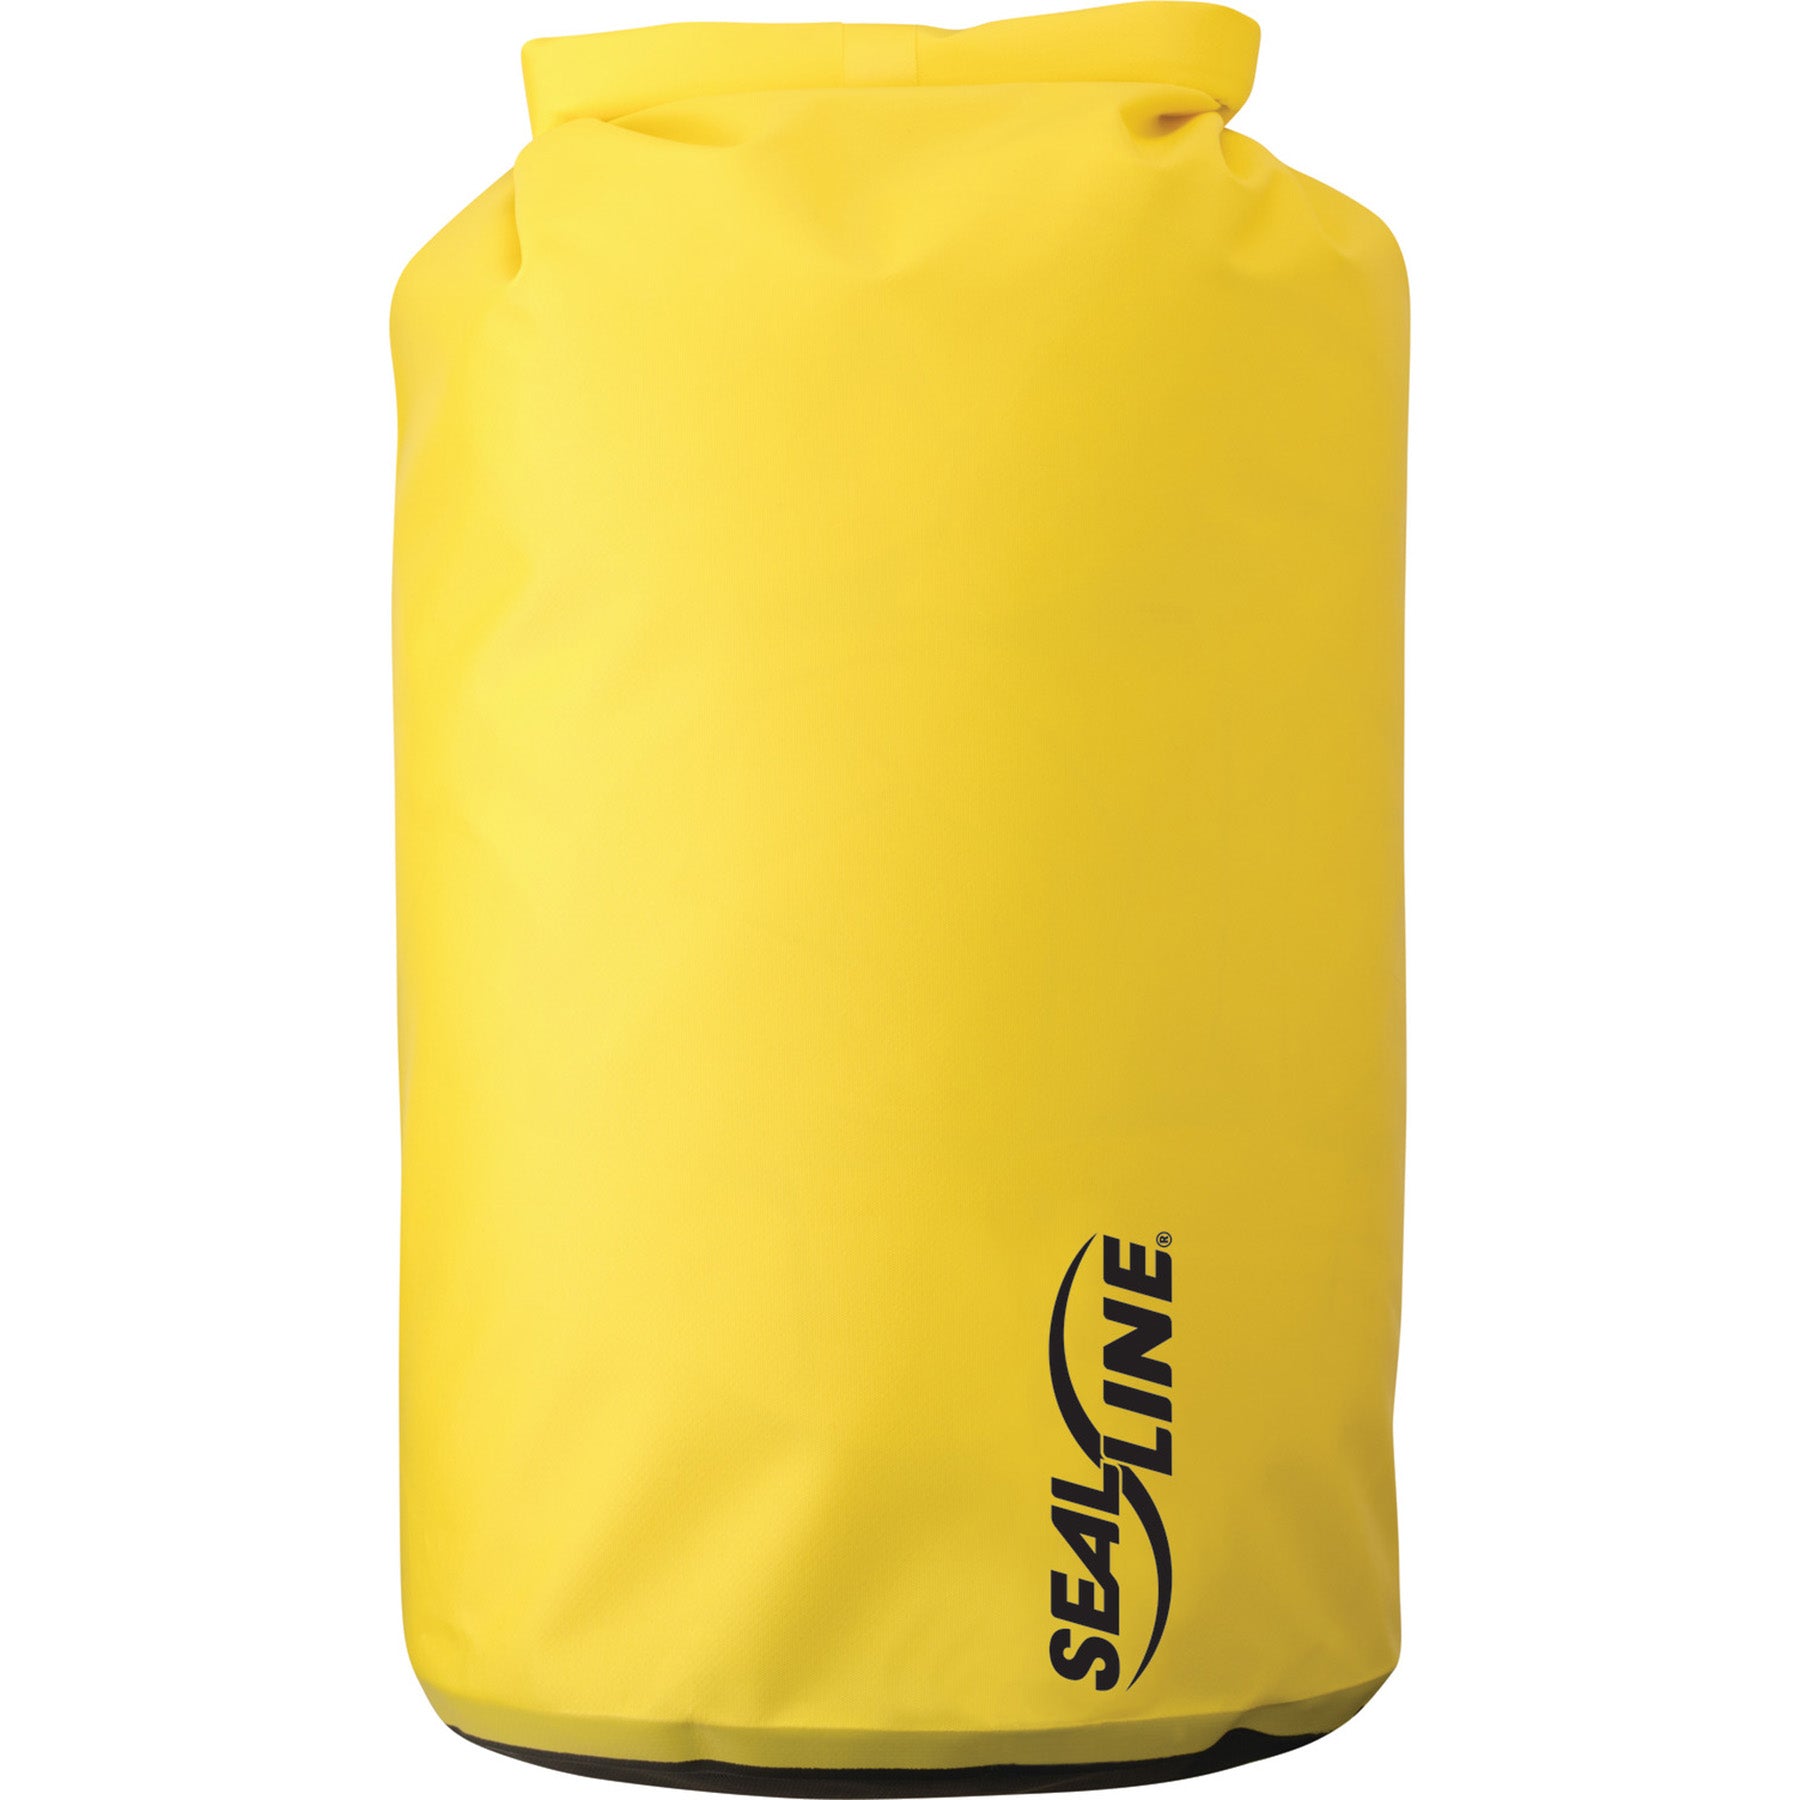 baja dry bag with top rolled up and closed